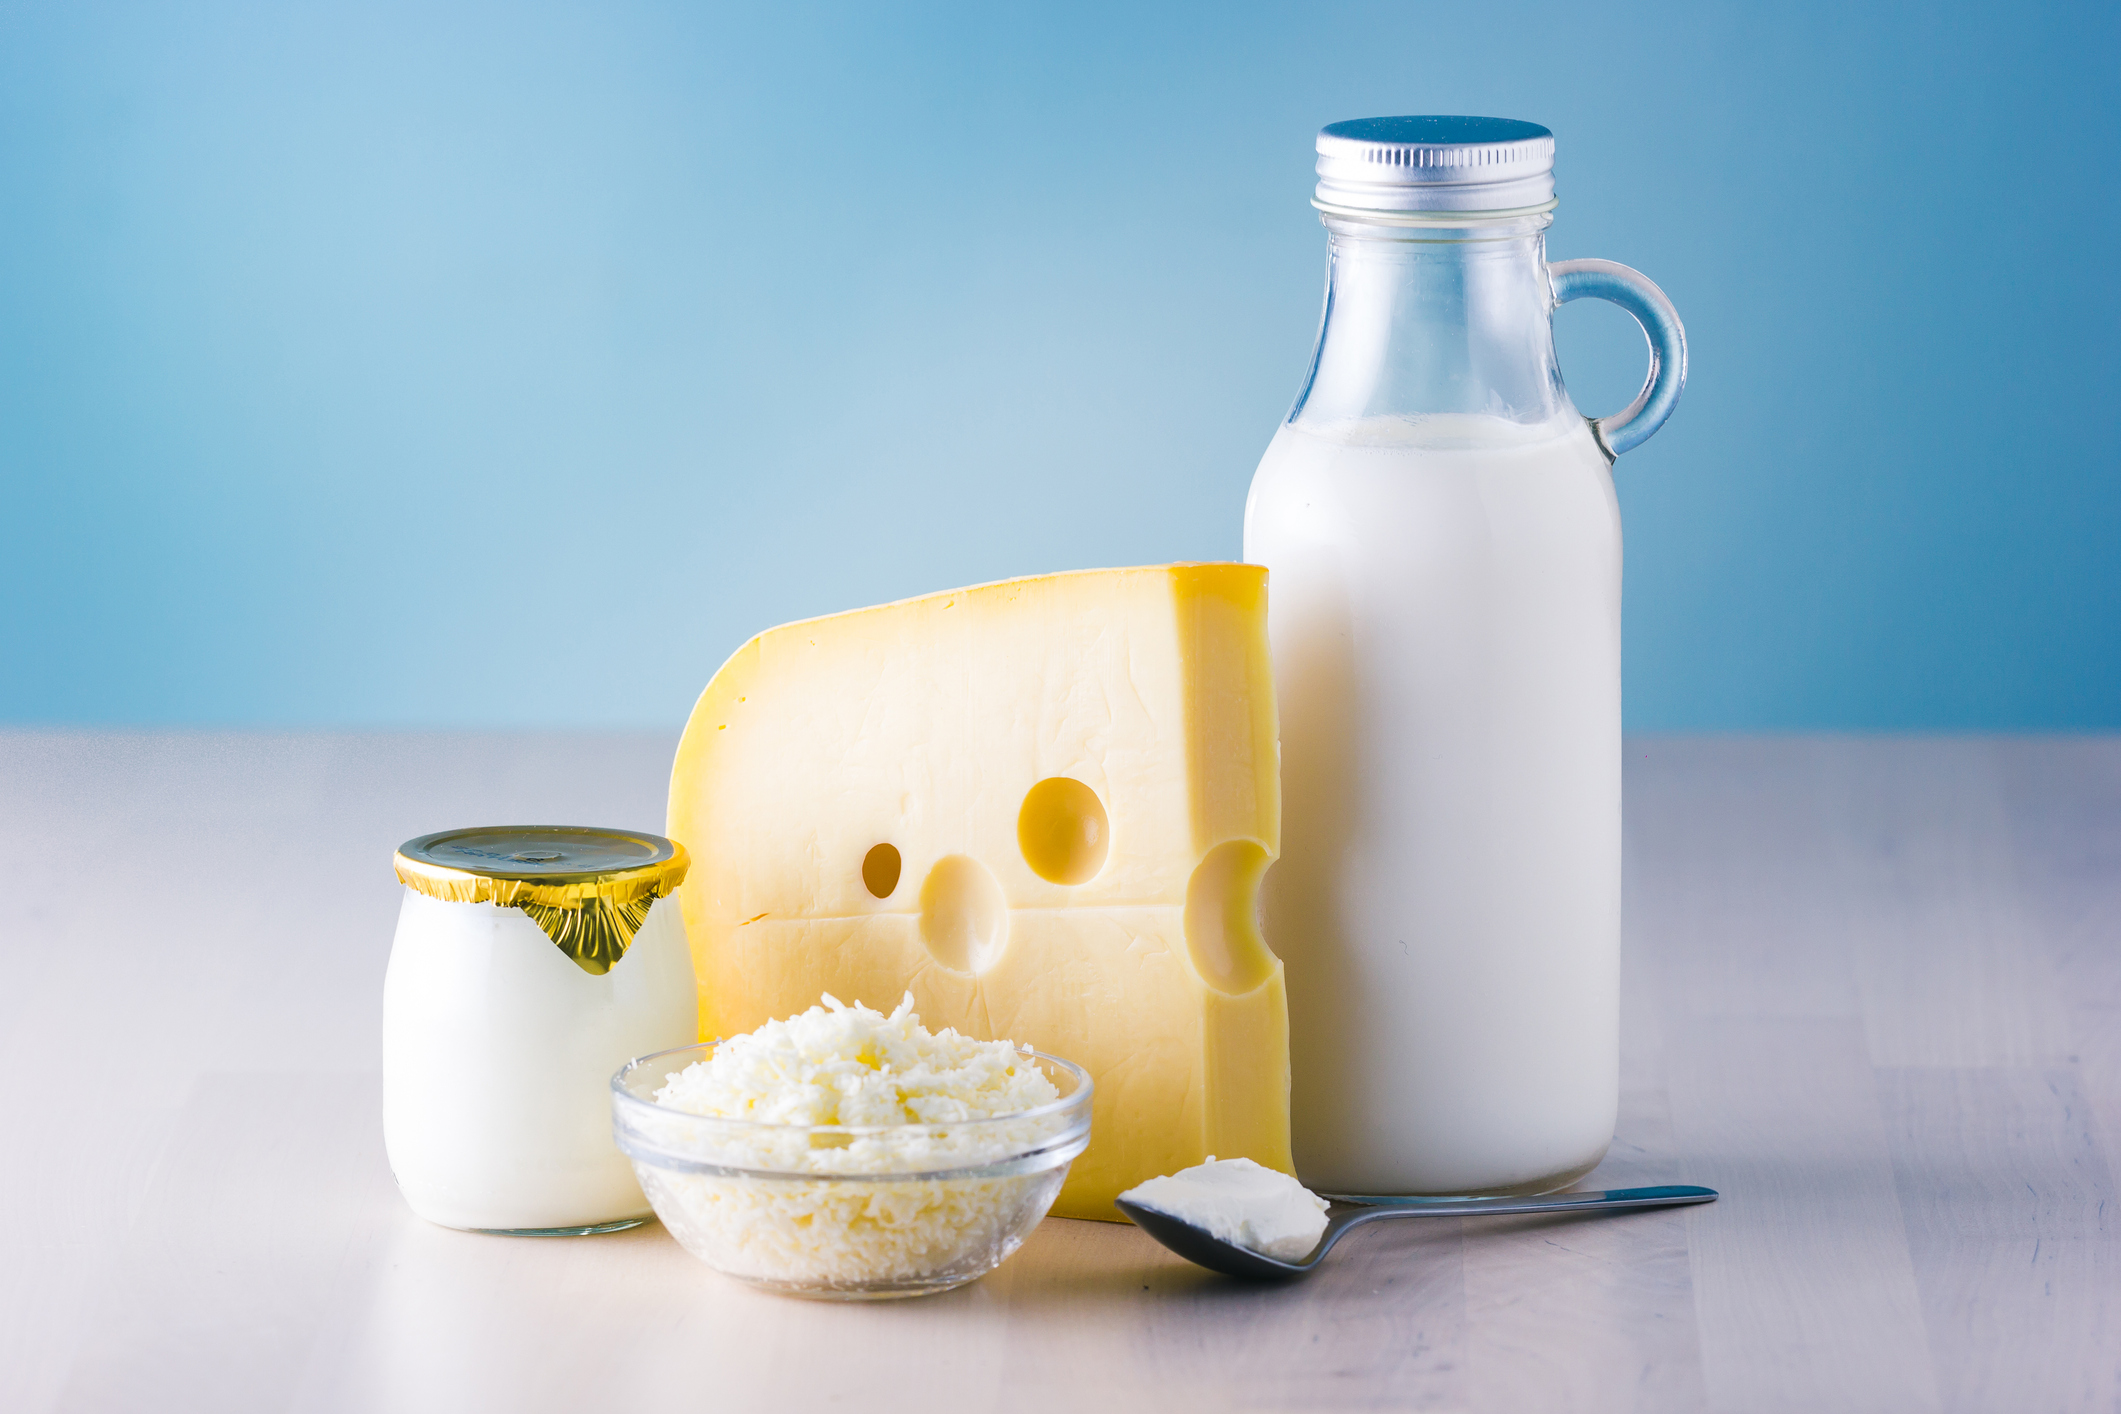 Global study links high fat dairy consumption to blood and heart health